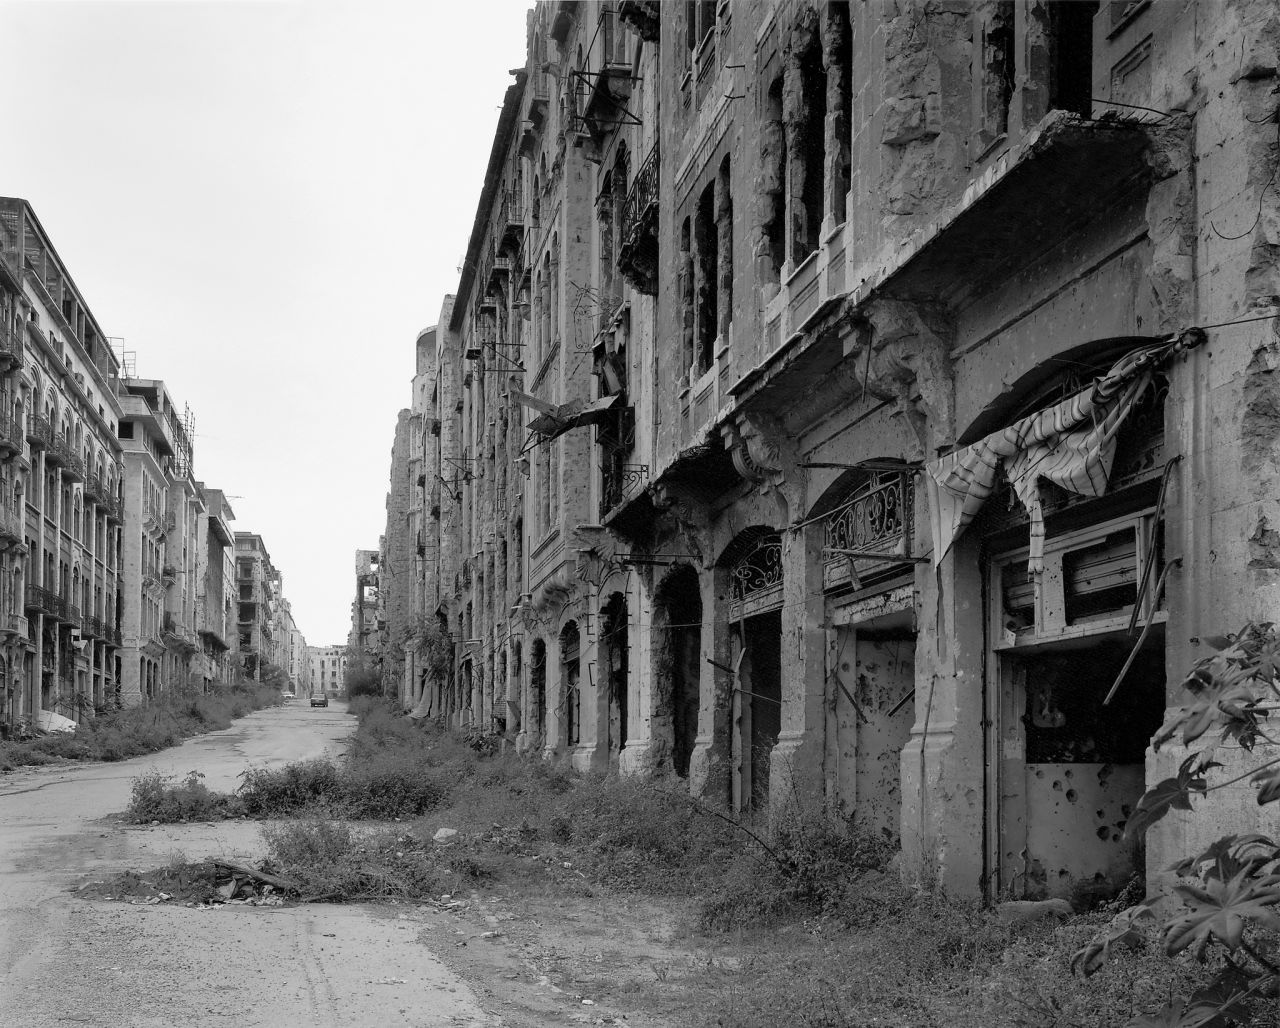 War-torn Beirut as it appeared in the aftermath of the civil war. The Beirut souks, historically the commercial heart of the city, have been rebuilt and now form the city's largest shopping area.